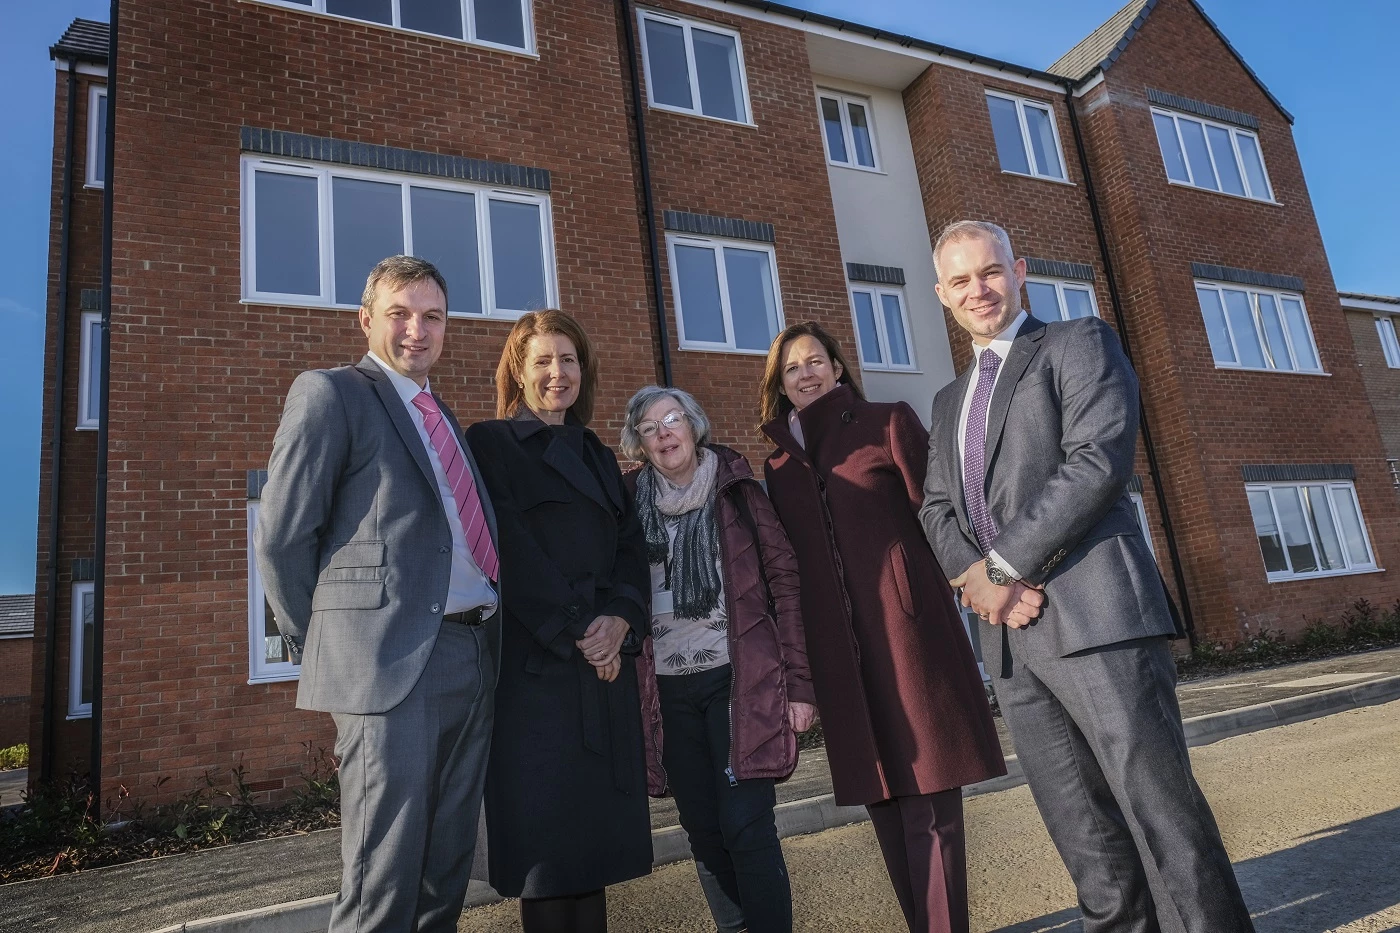 L-R: Gavin Cordwell-Smith (Hellens Group), Jenny Chapman MP, Cllr Marjorie Knowles, Kate Hellens (Hellens Residential) and Steven Ball (Taylor Wimpey)